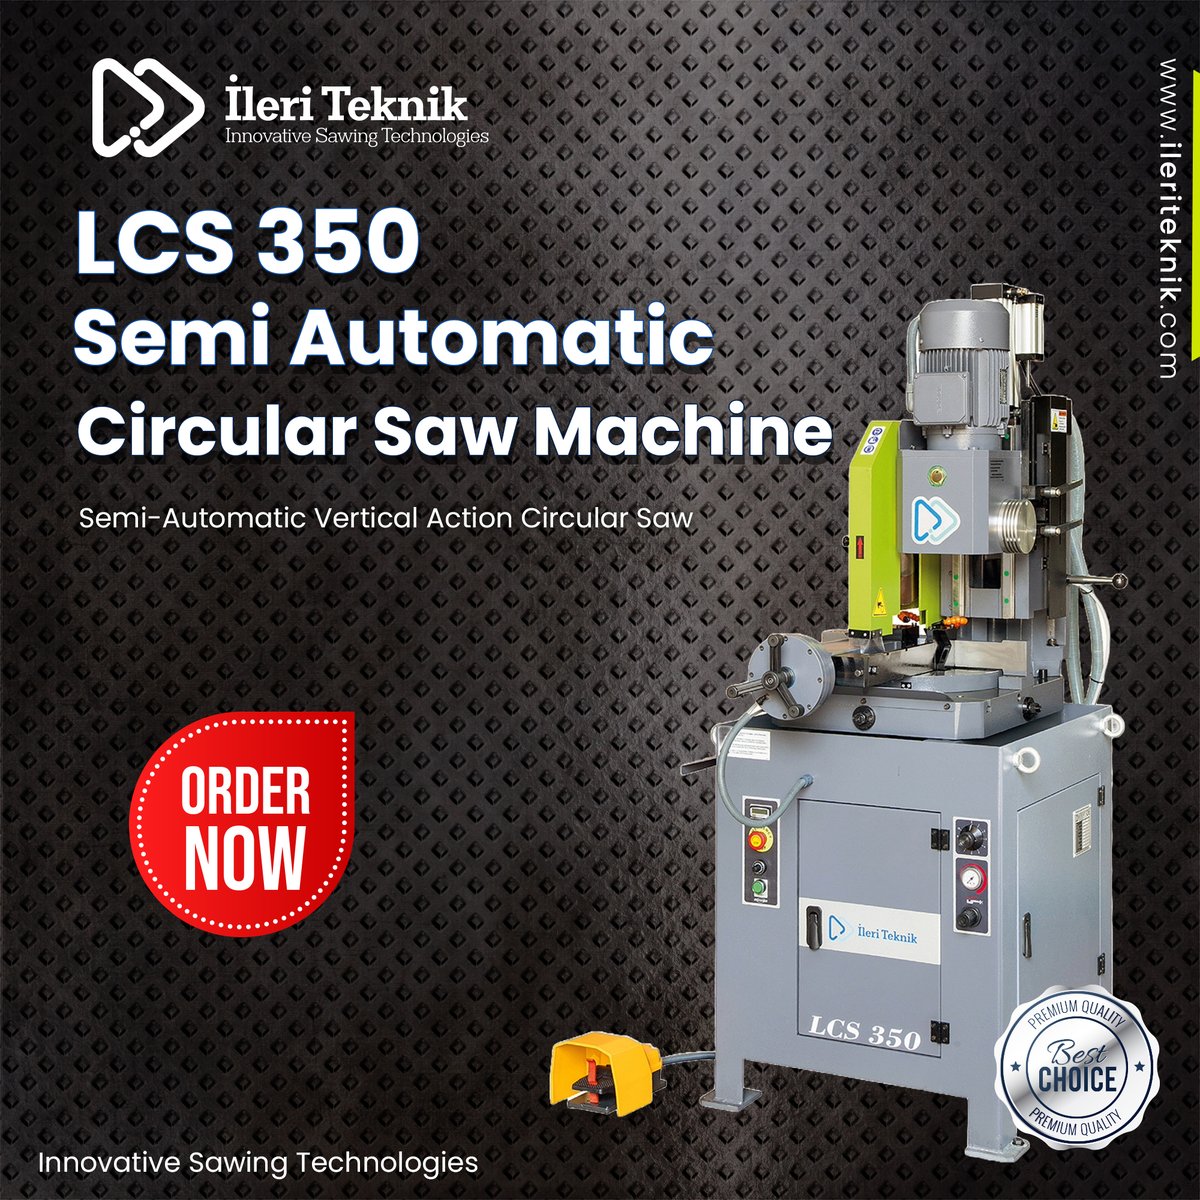 🔥 Revolutionize Your Cutting Experience with the LCS 350 Semi Automatic Circular Saw Machine! 🛠️

ileriteknik.com/products/lcs-3…

#CircularSaw #IndustrialTech #PrecisionCutting #WorkshopEssentials #HeavyDuty  #ToolTech #Innovation #EfficiencyBoost #ileriteknik